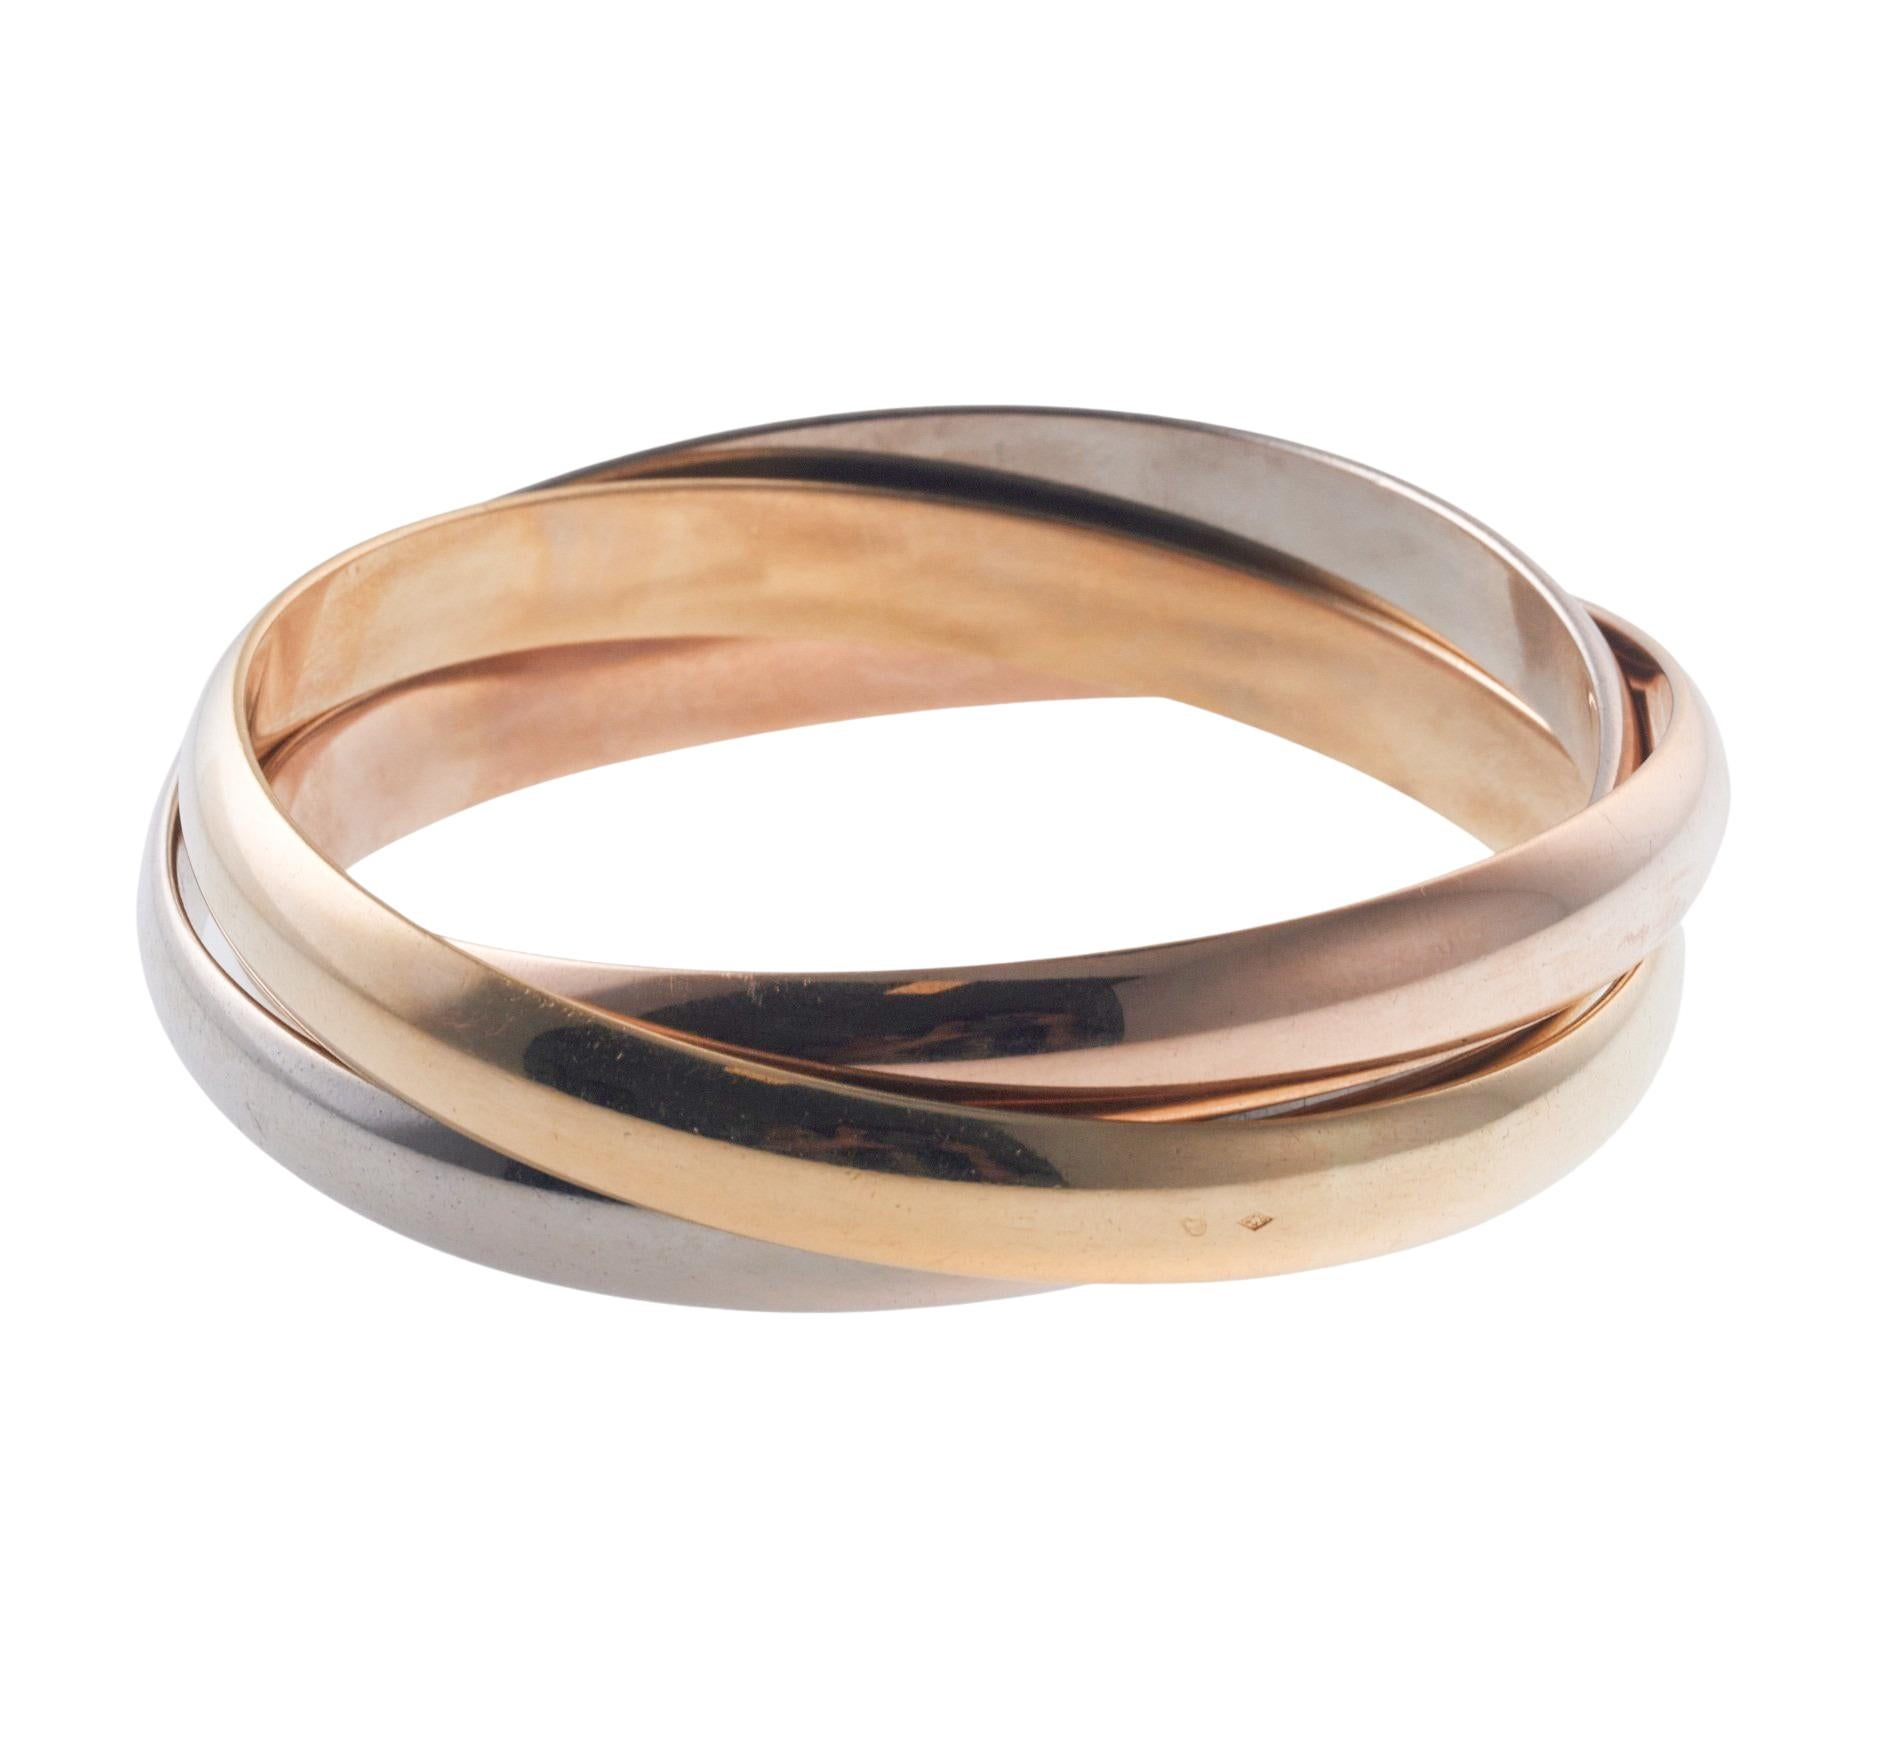 Cartier Trinity collection large model bangle bracelet in 18k gold. Bracelet will fit approx. 7